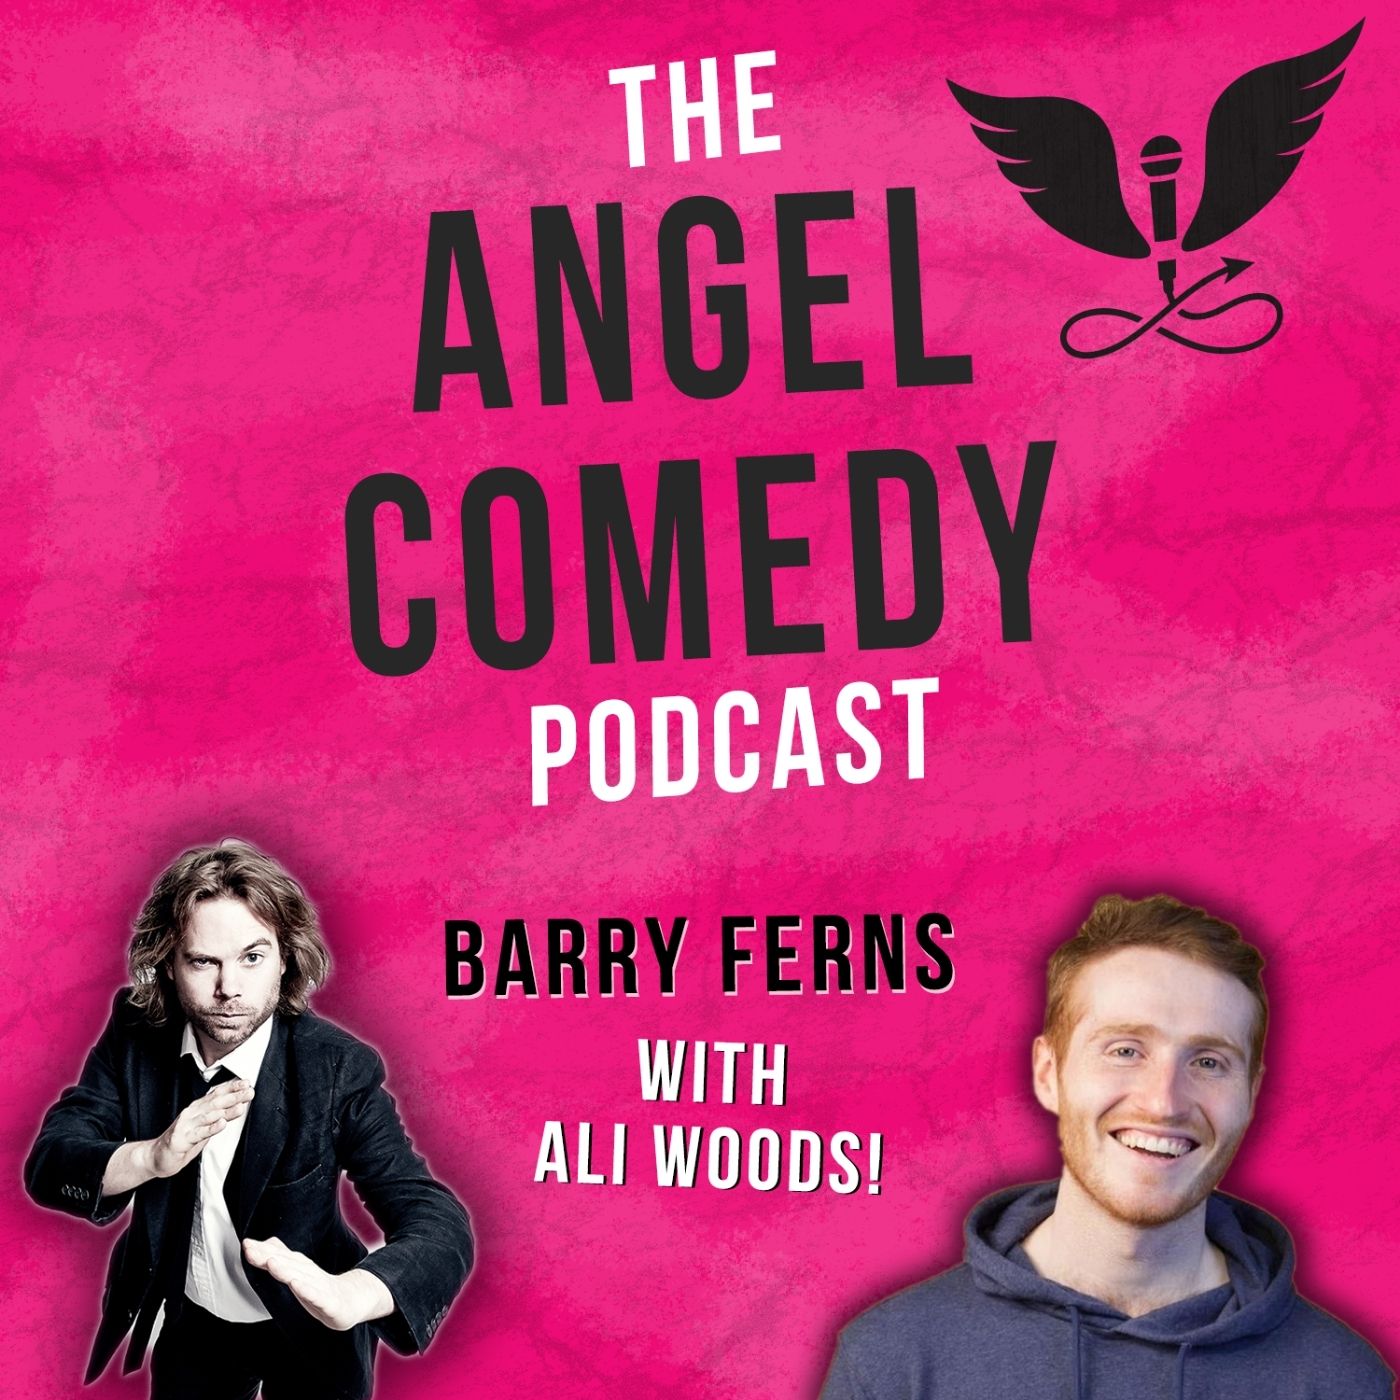 The Angel Comedy Podcast with Ali Woods